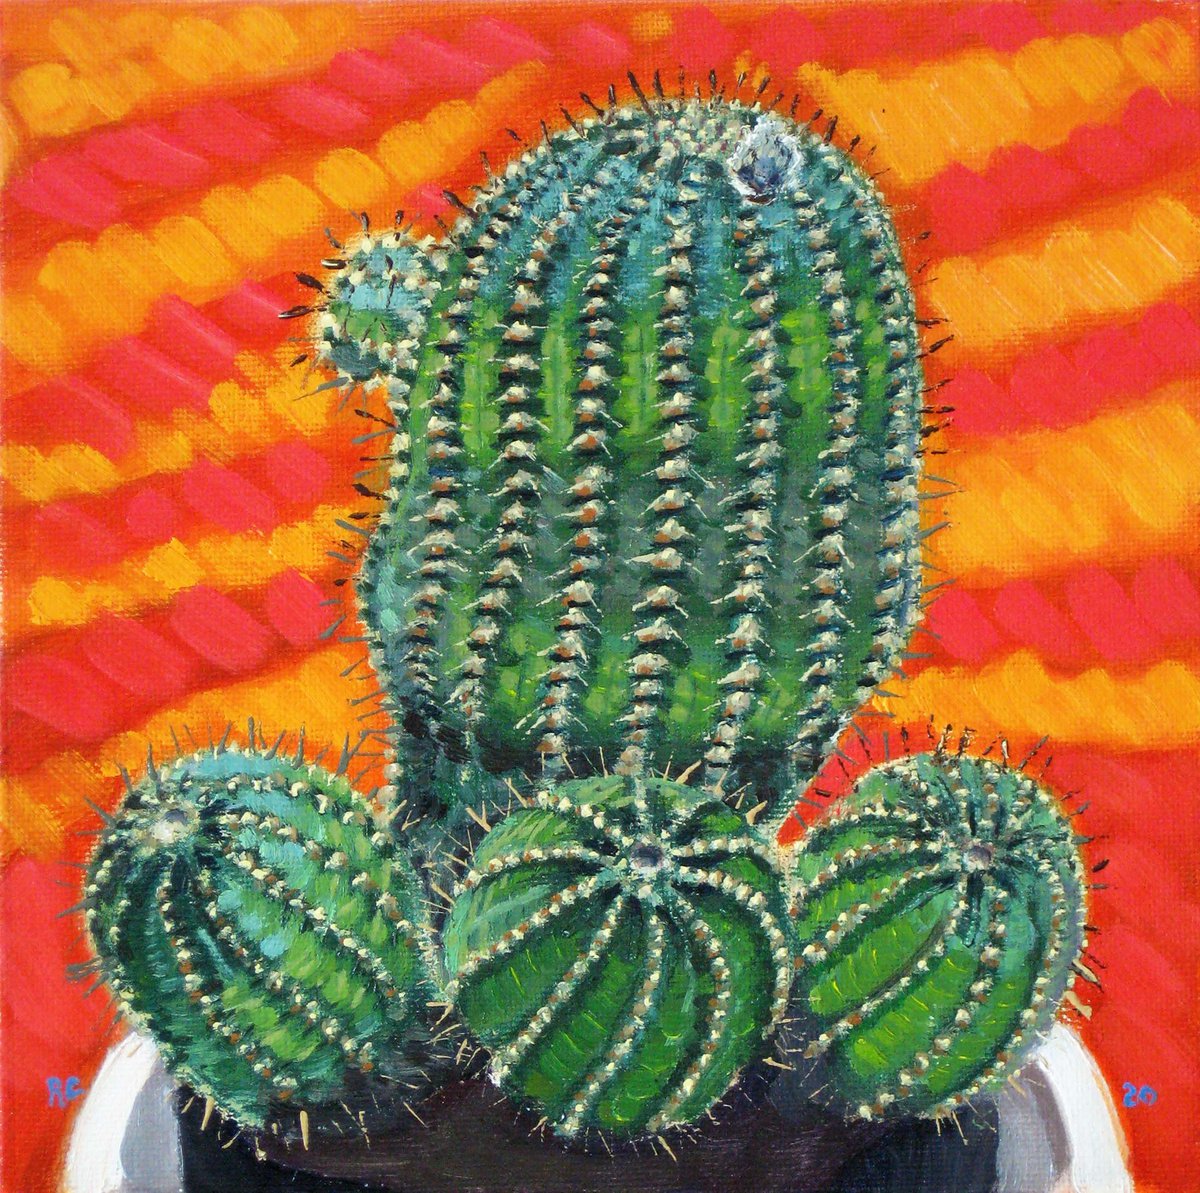 Cactus on a Striped Background by Richard Gibson